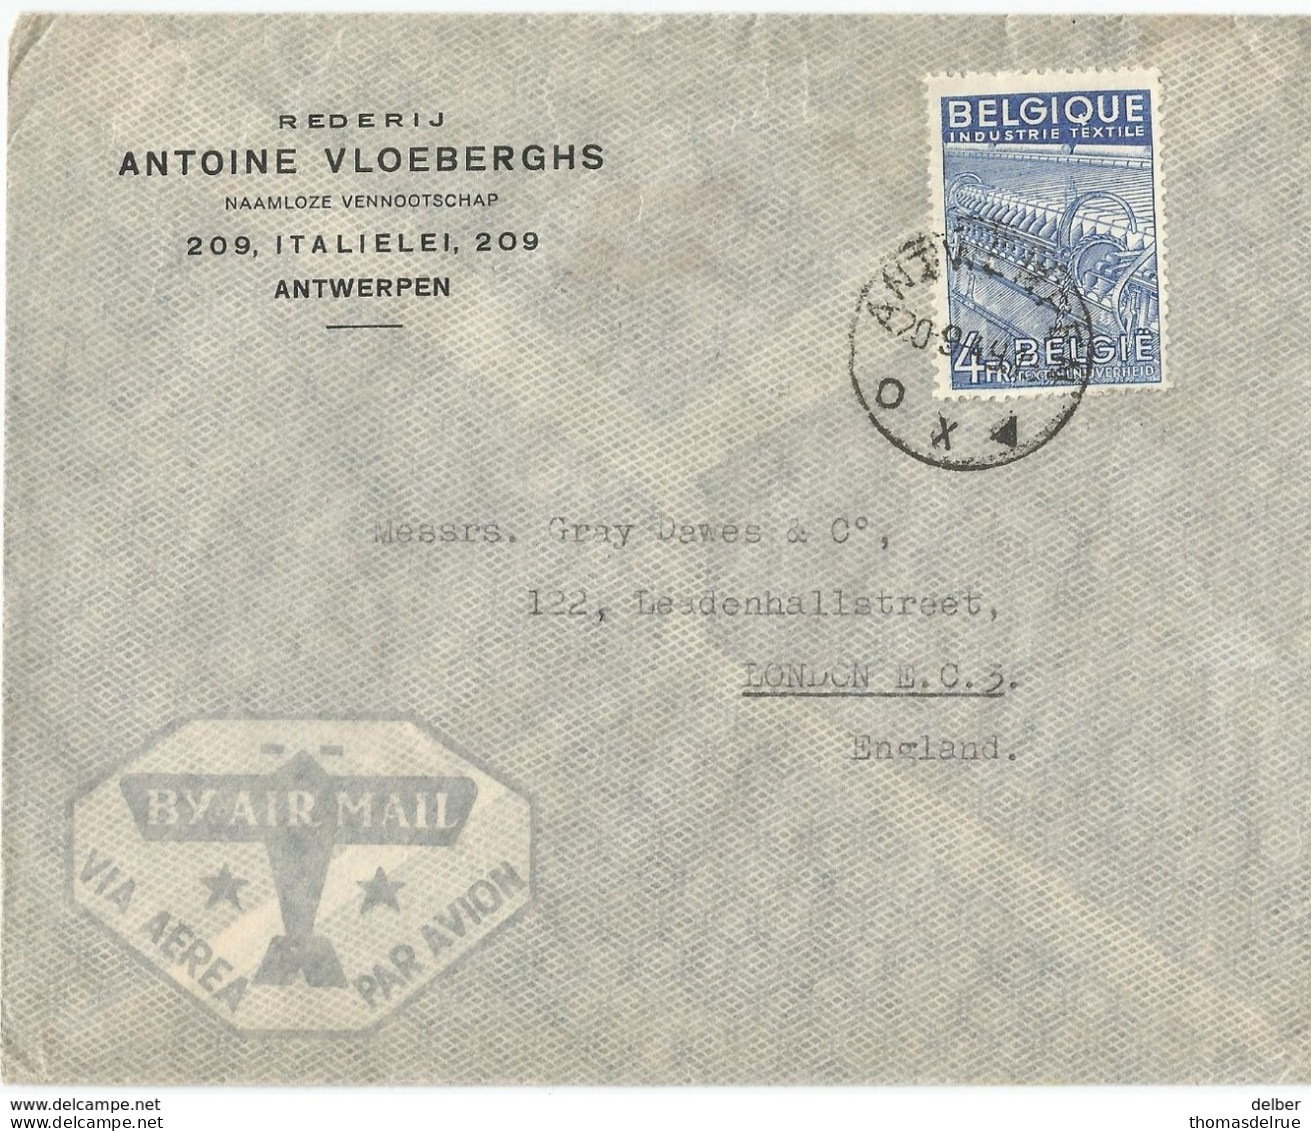 6Mm-941 N° 771 : ANTWERPEN 20-9-49 OX▲ > London  By Air Mail - 1948 Exportation